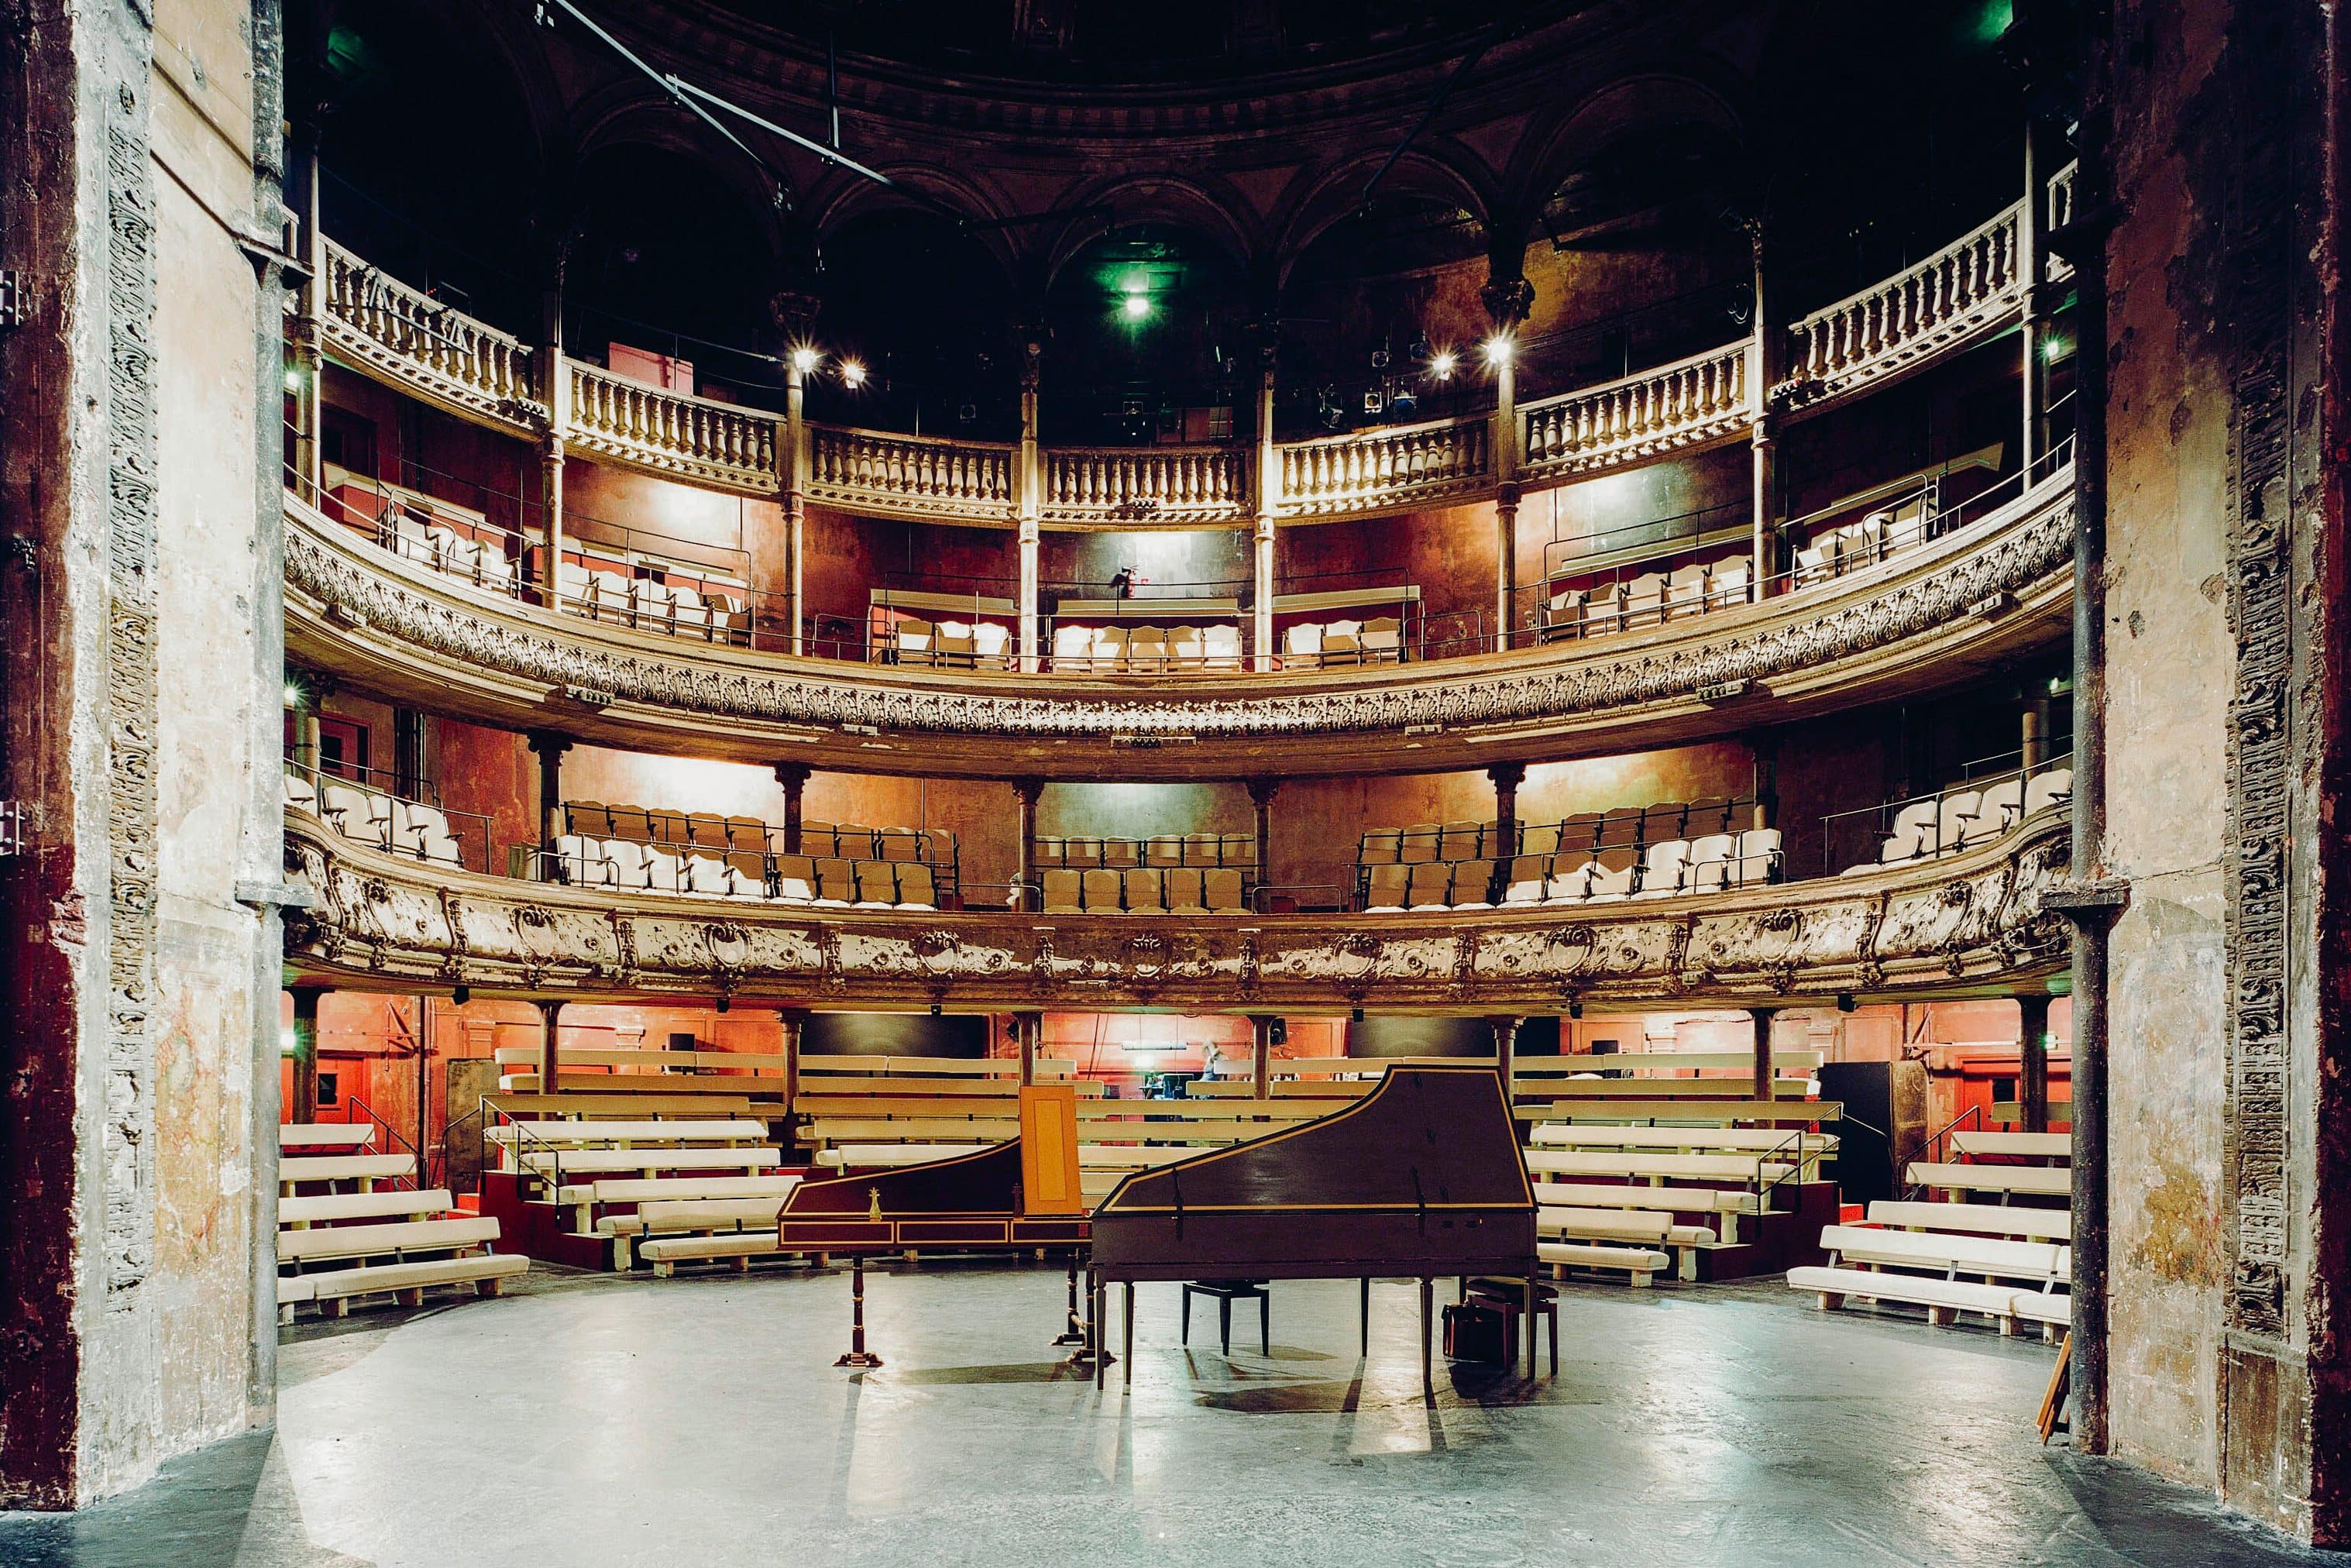 The empty auditorium of Bouffes du Nord as seen from the stage with two grand pianos in the foreground